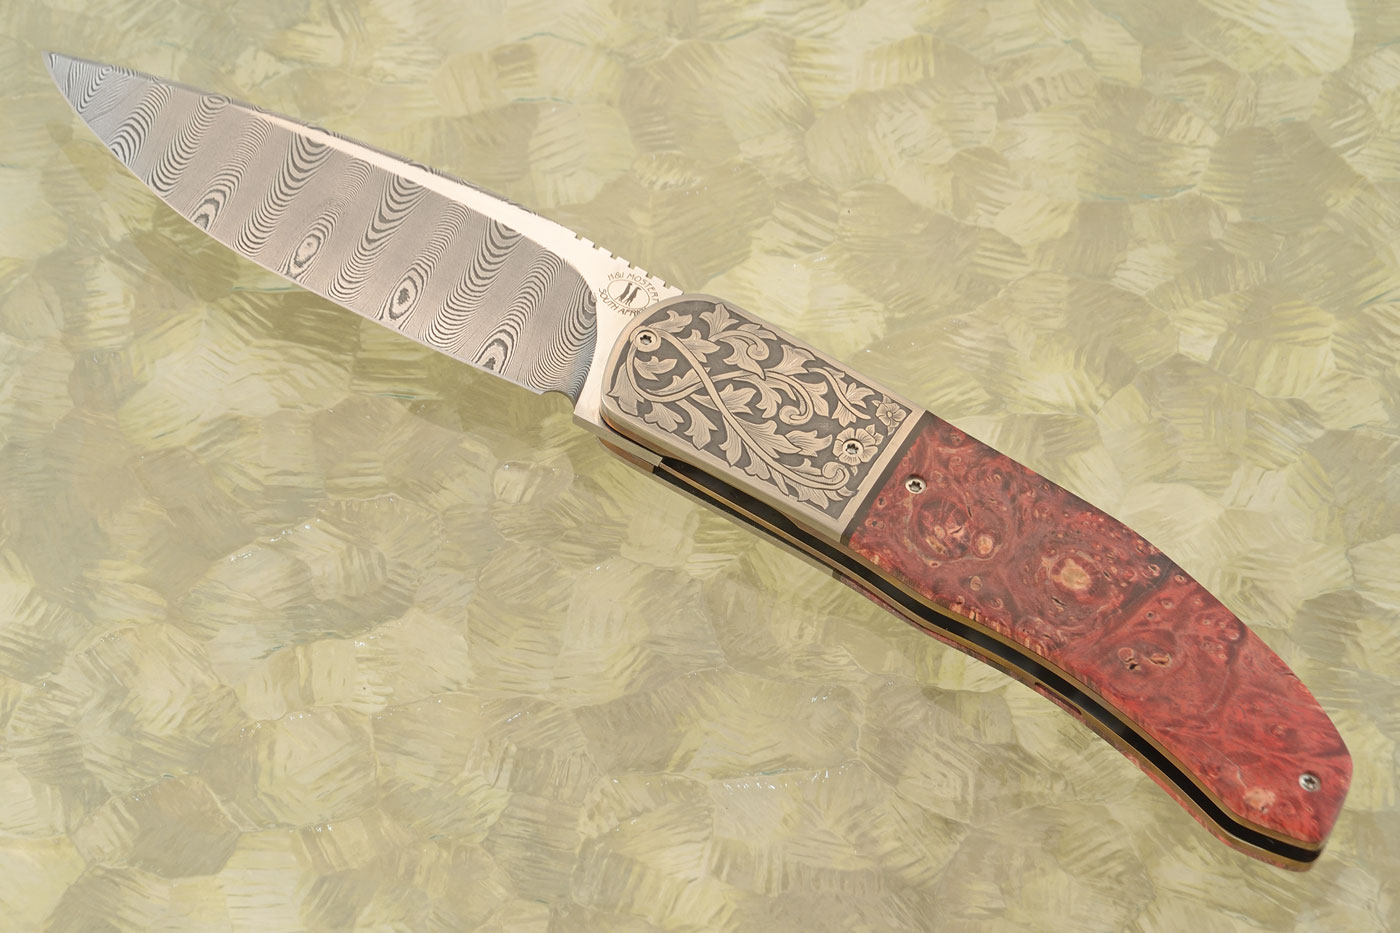 HI-04 Front Flipper with Damascus, Maple Burl, and Engraved Titanium